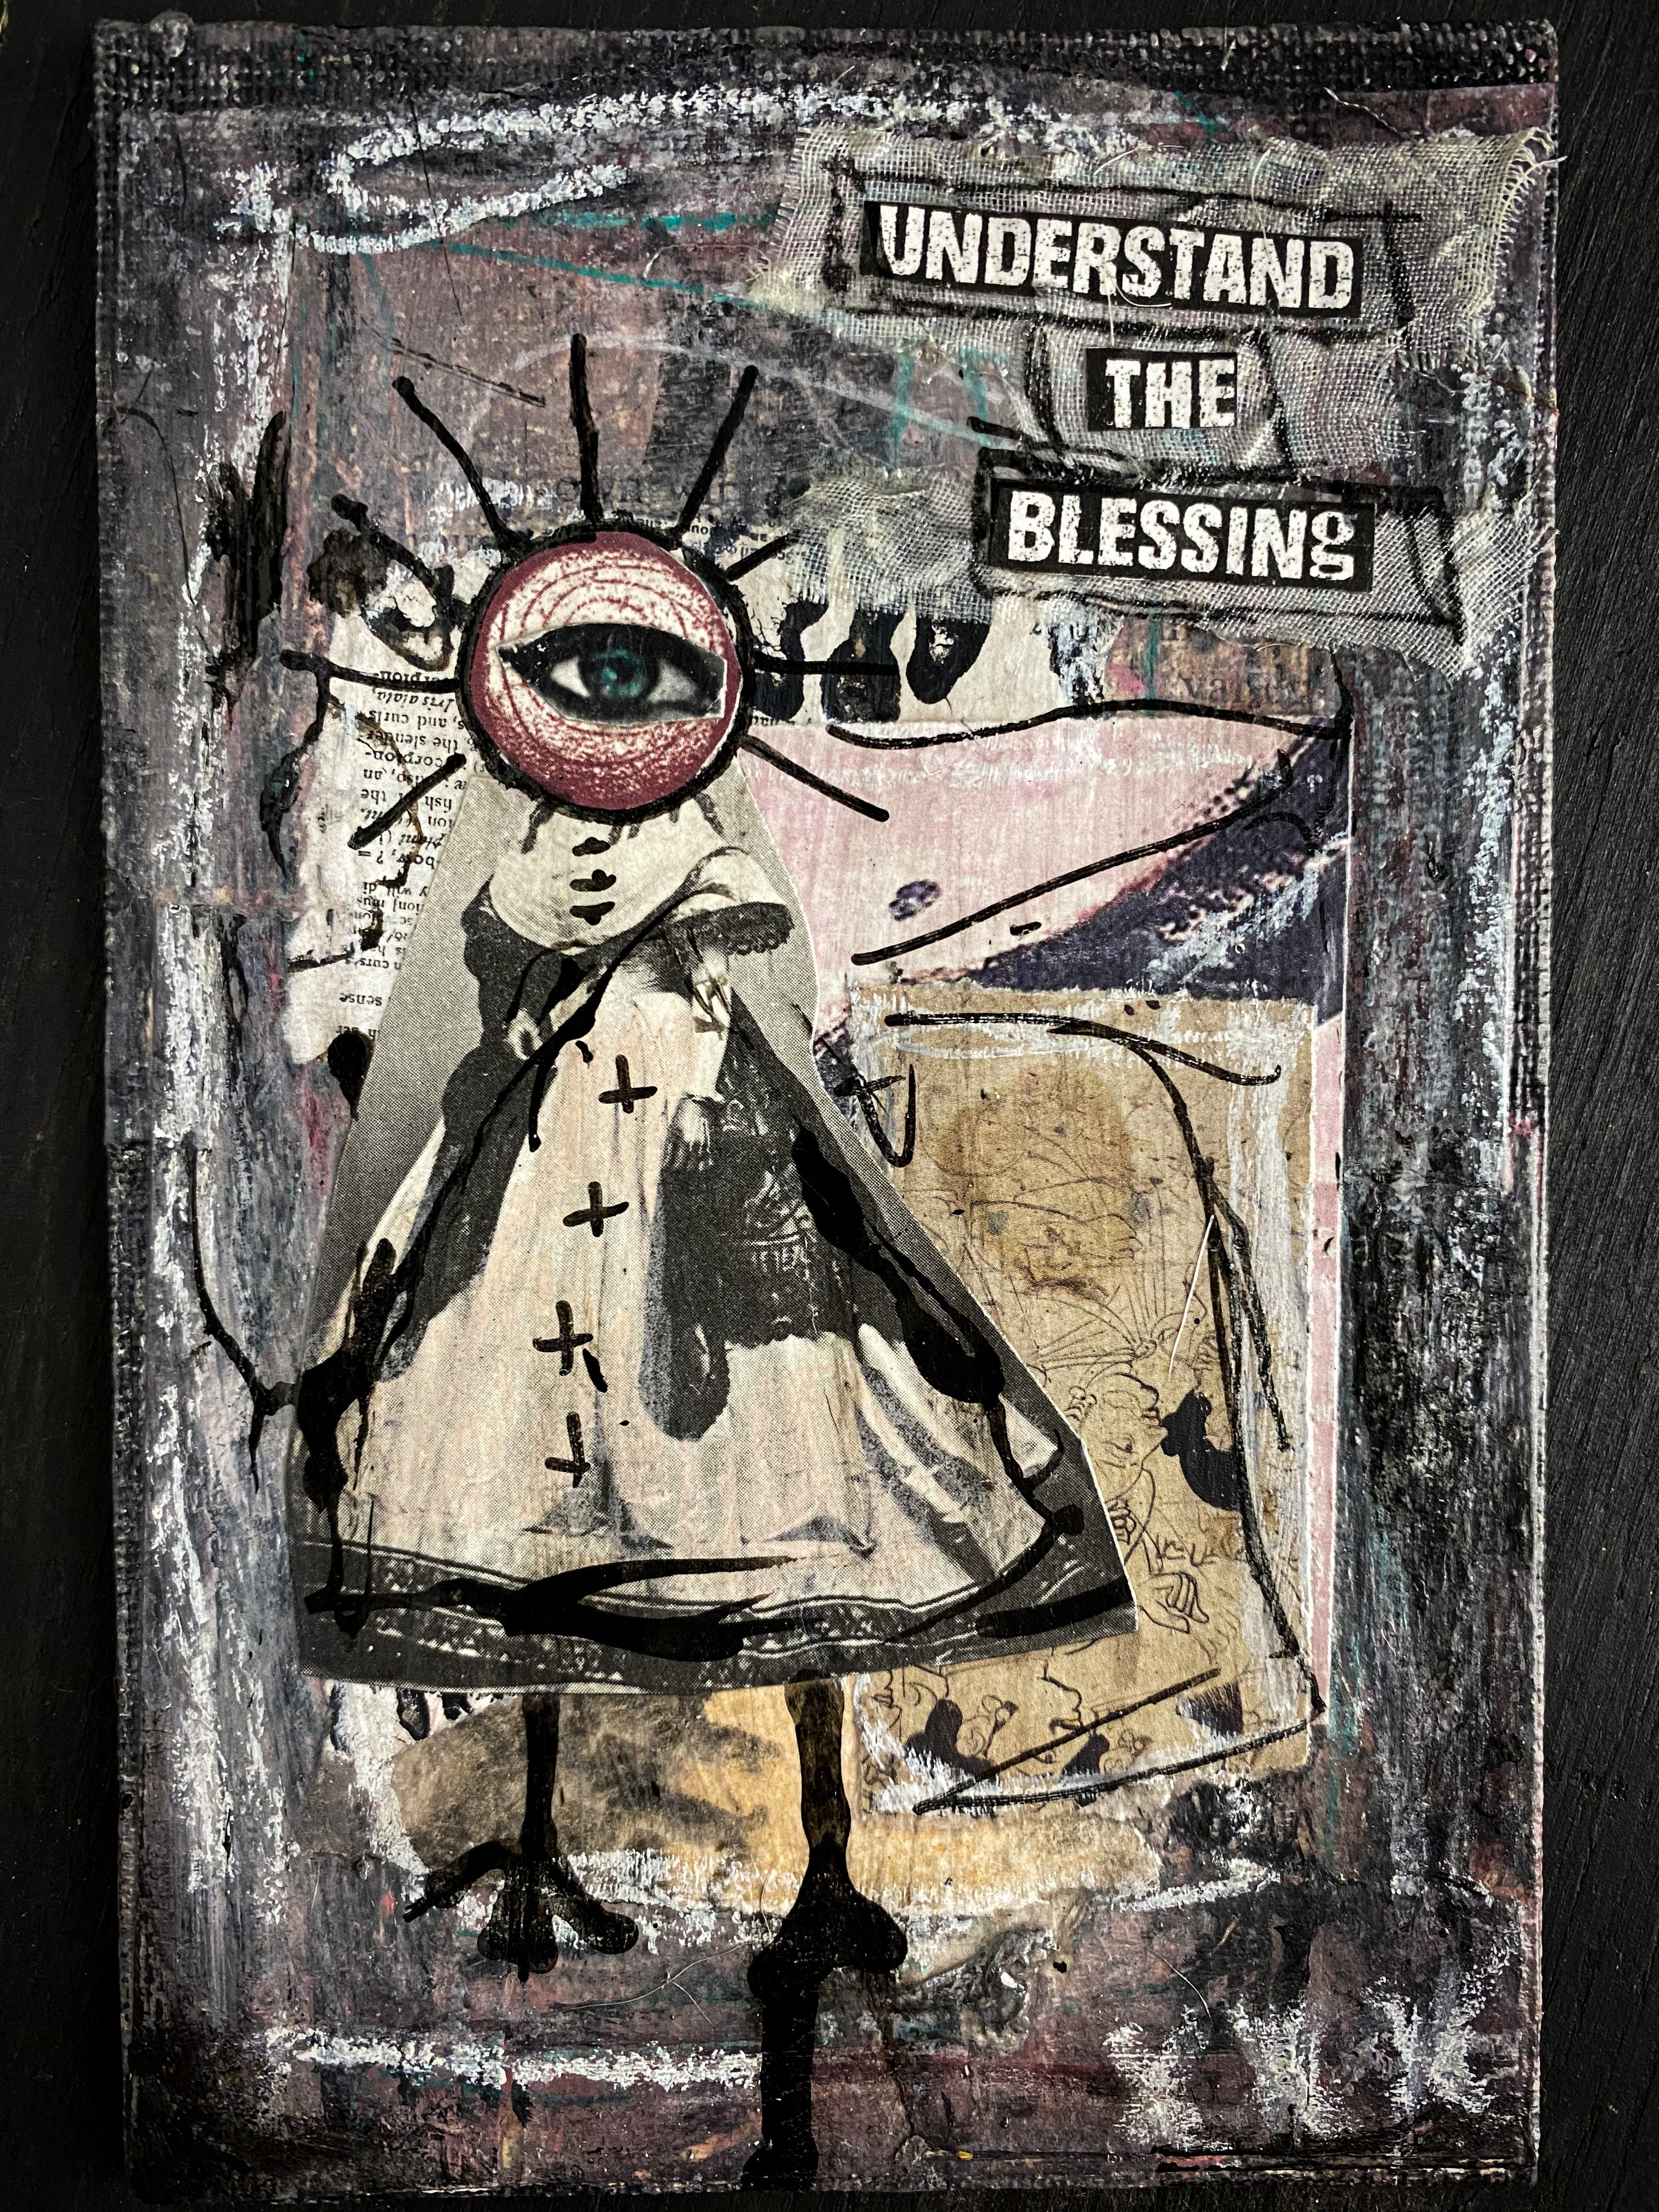 Understand the Blessing - Original Mixed Media Collage